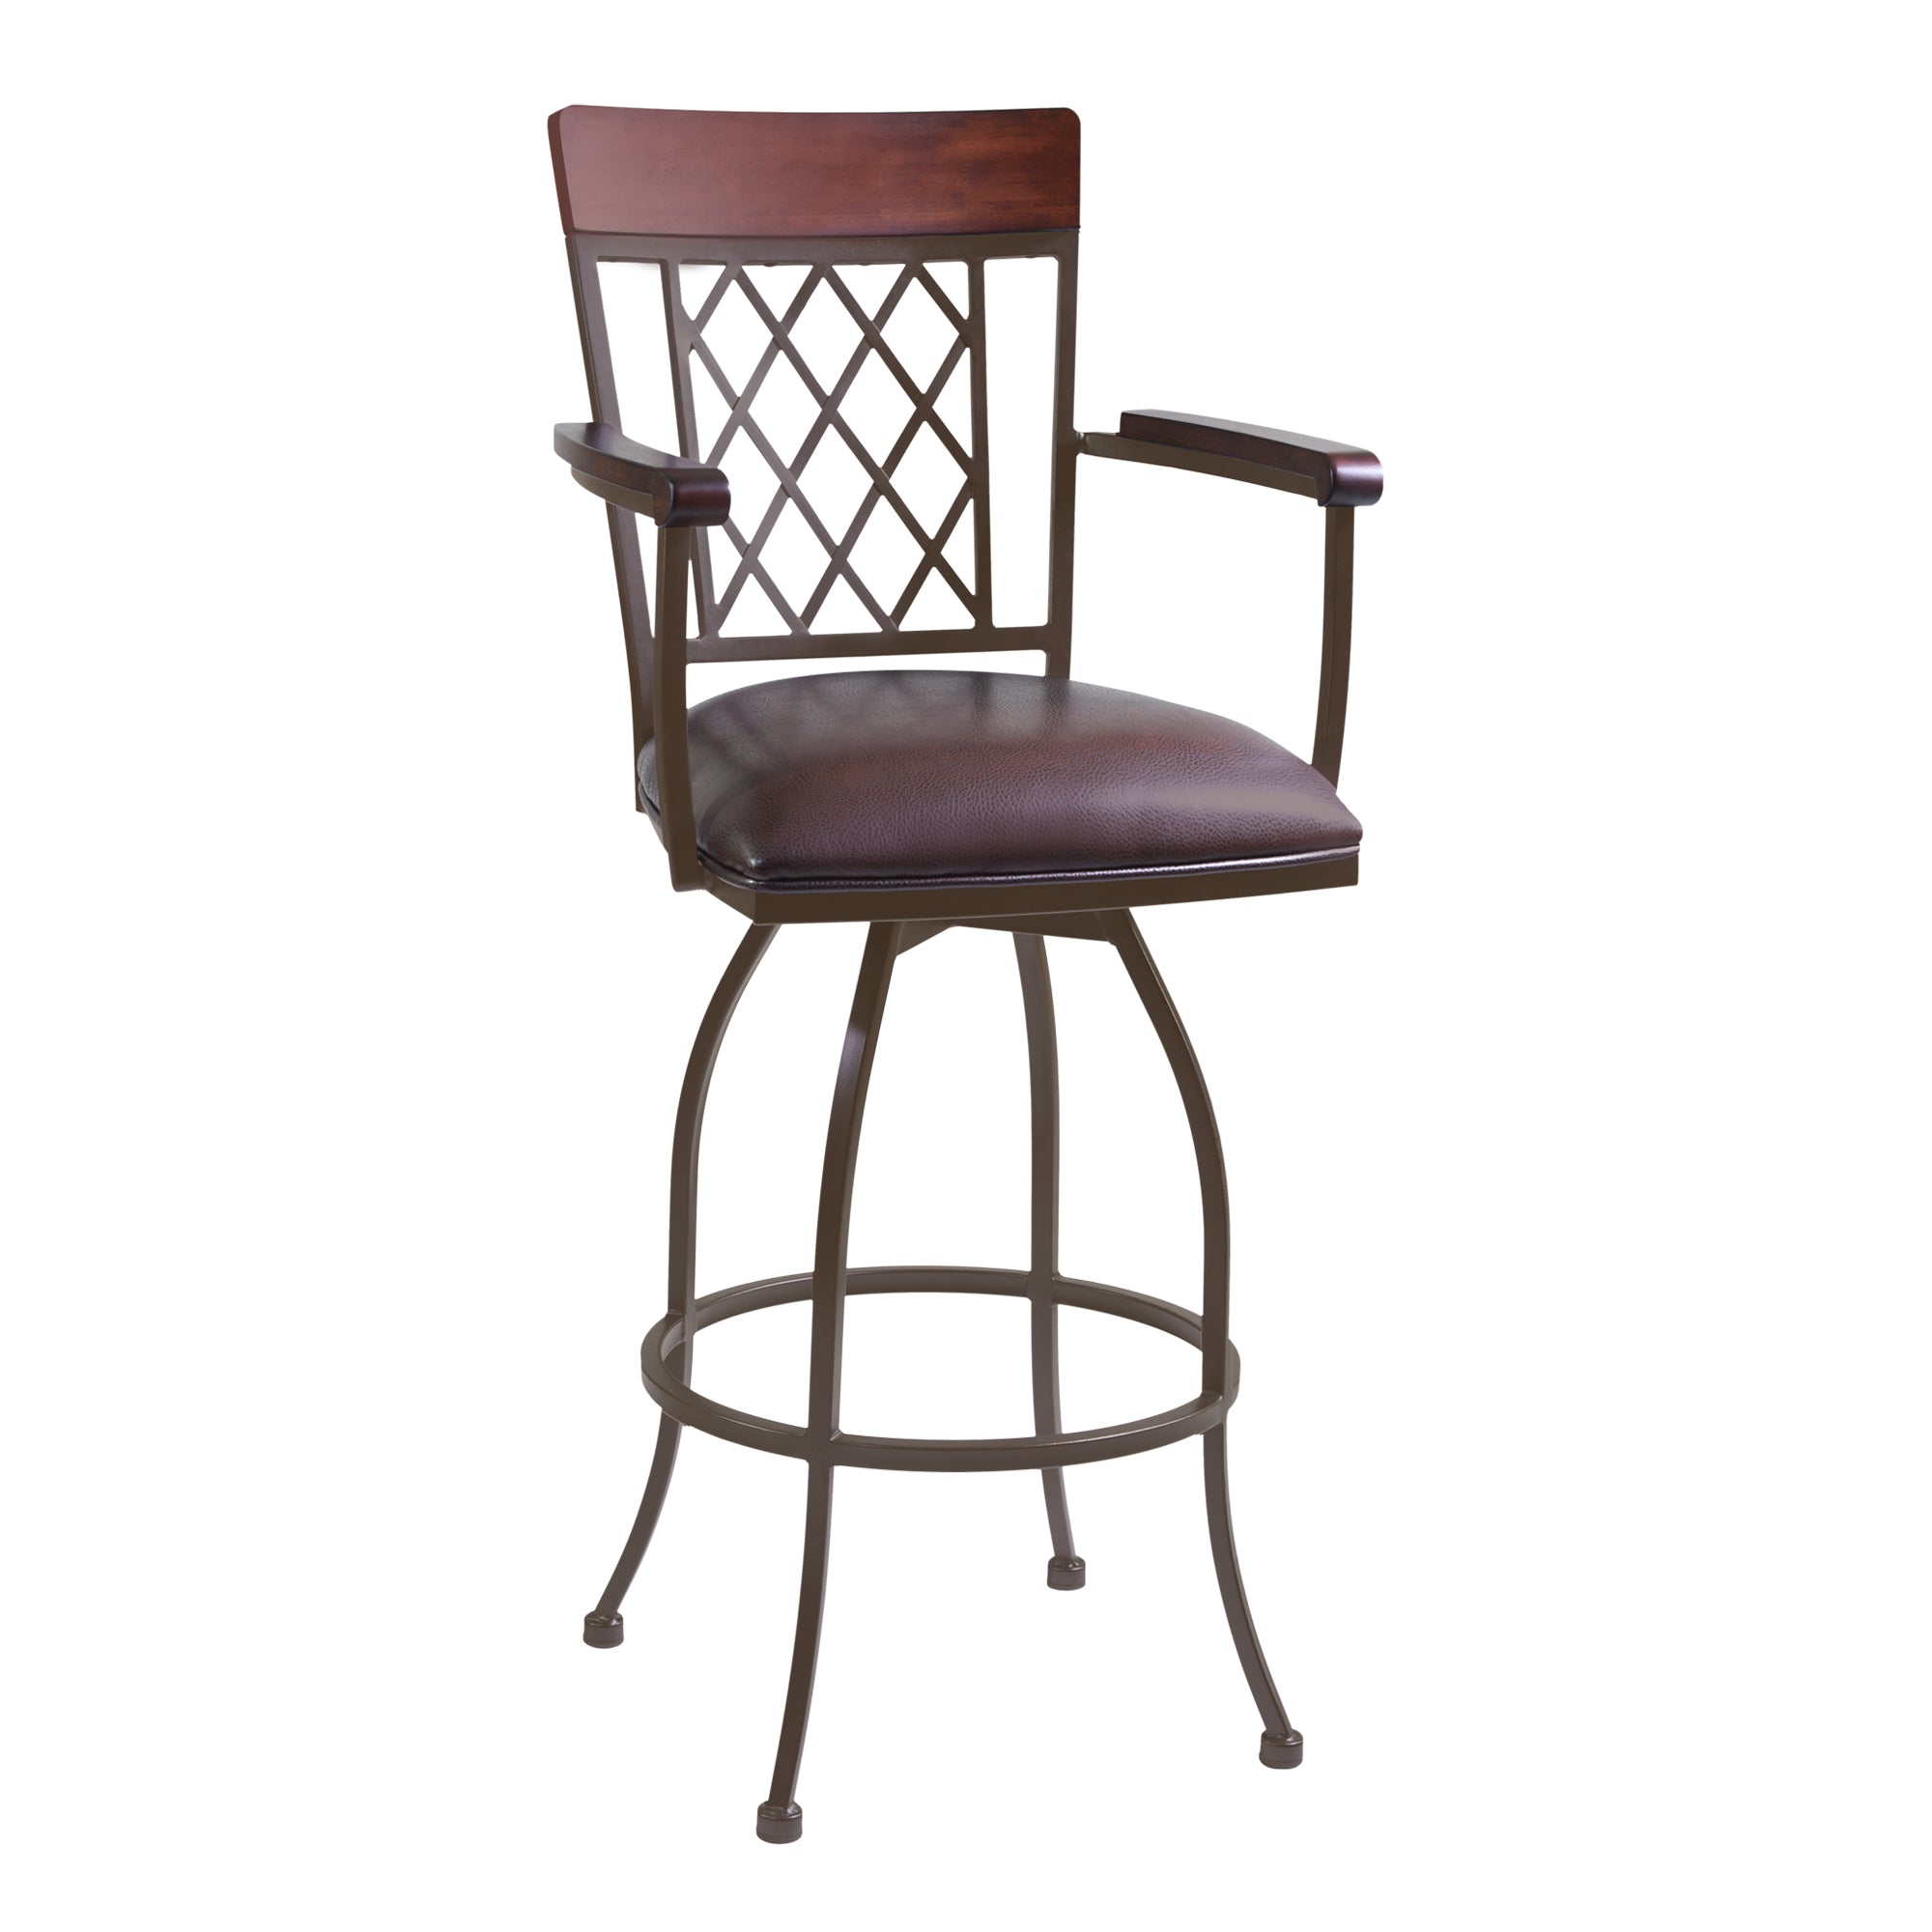 Armen Living Lcna26arbabr Napa 26" Counter Height Arm Barstool In Auburn Bay Finish With Brown Faux Leather